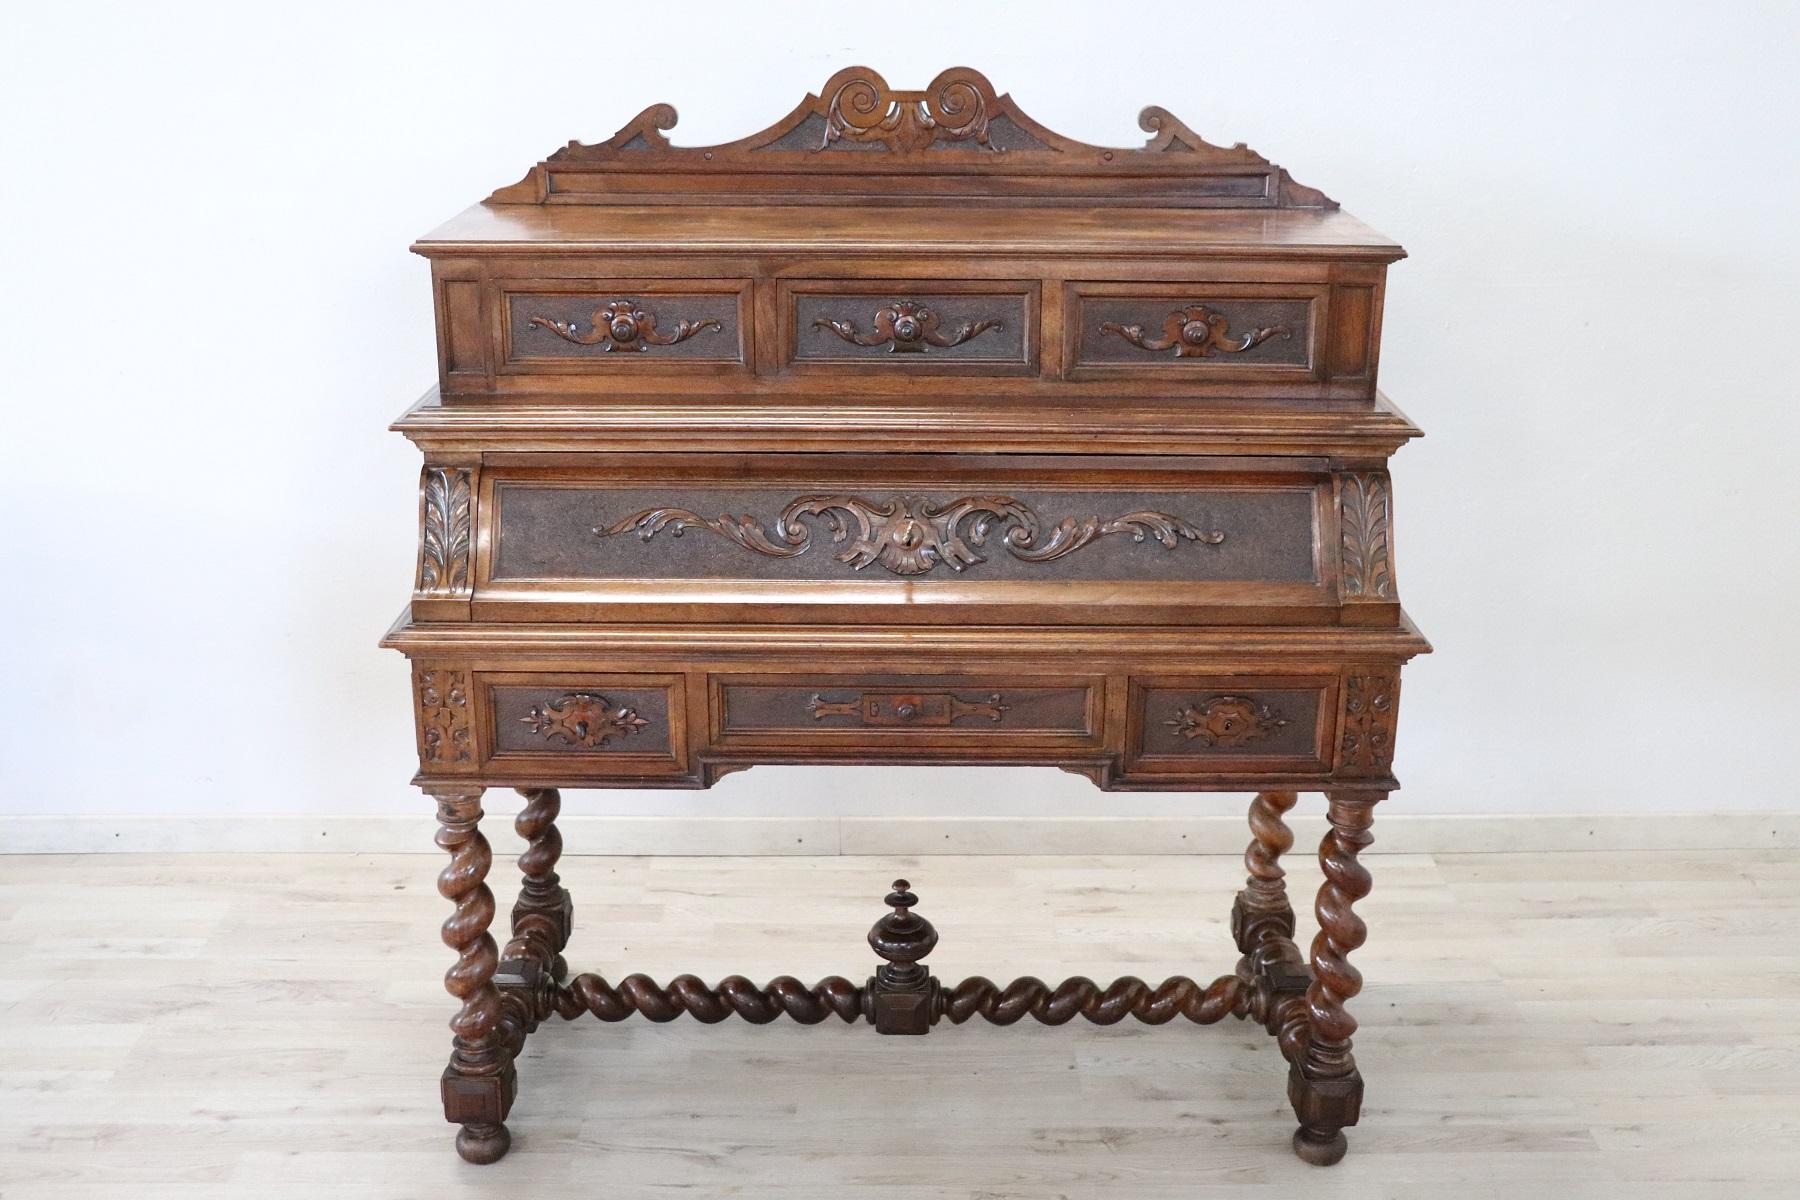 Majestic antique Italian renaissance style writing desk. Rare and precious solid carved walnut wood. Comfortable size for a practical use. The desk has elegant turned legs. Equipped with six practical drawers. The front opens and becomes a